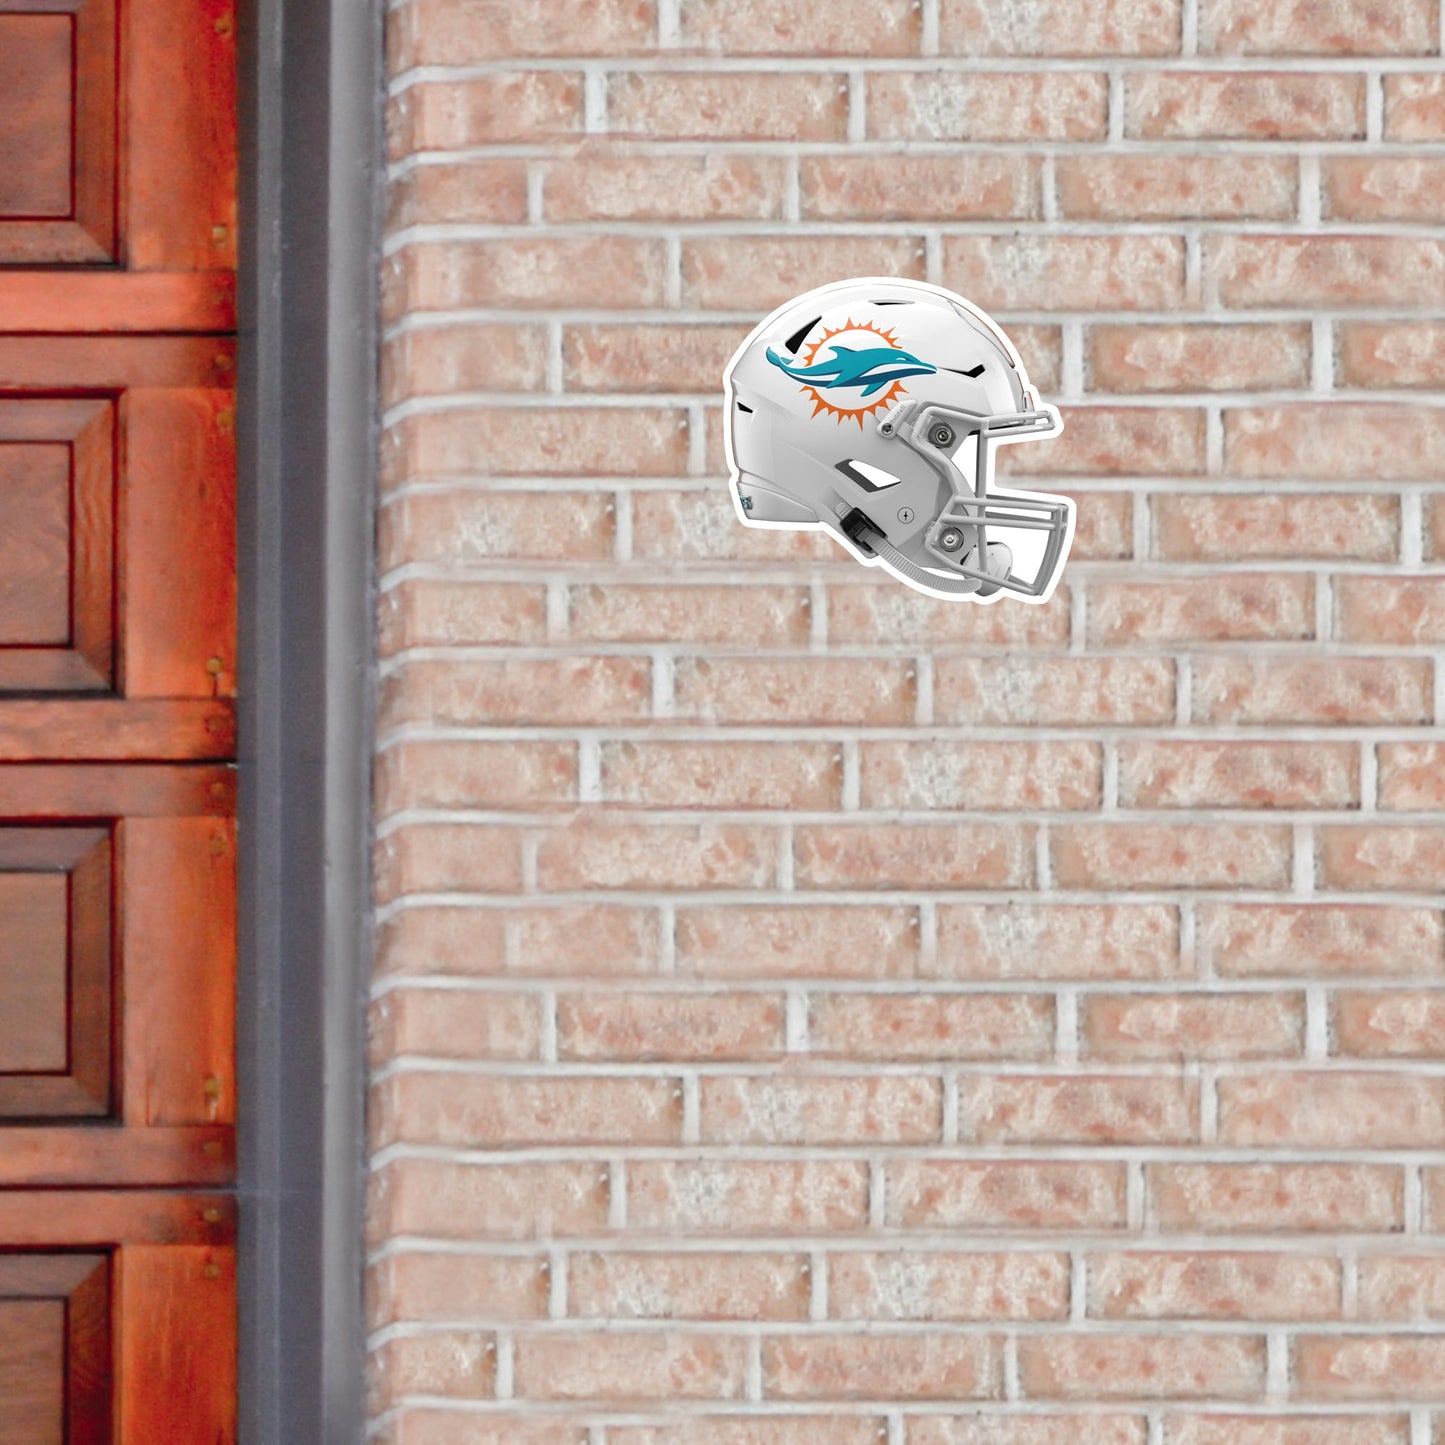 Miami Dolphins: Outdoor Helmet - Officially Licensed NFL Outdoor Graphic